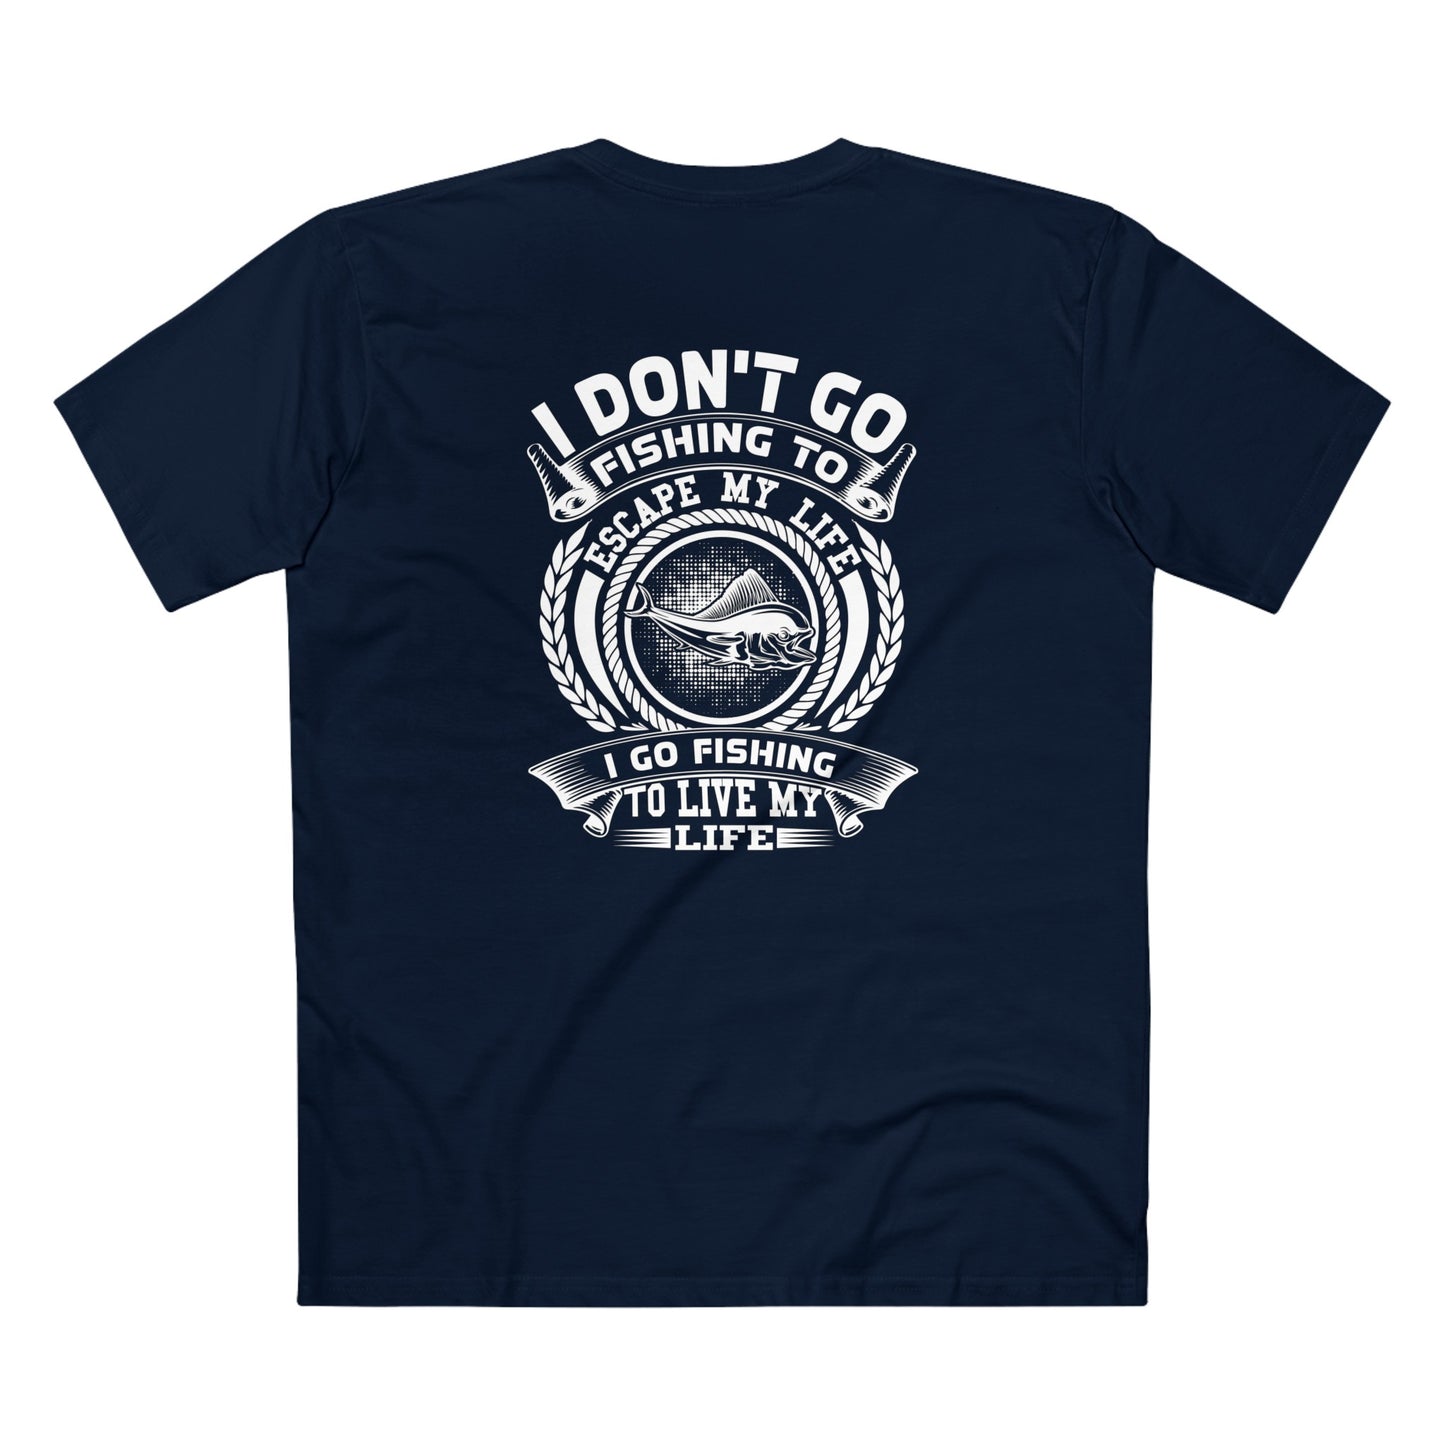 Men's Staple Tee - I Don't Go Fishing To Escape My Life I Go Fishing To Live My Life